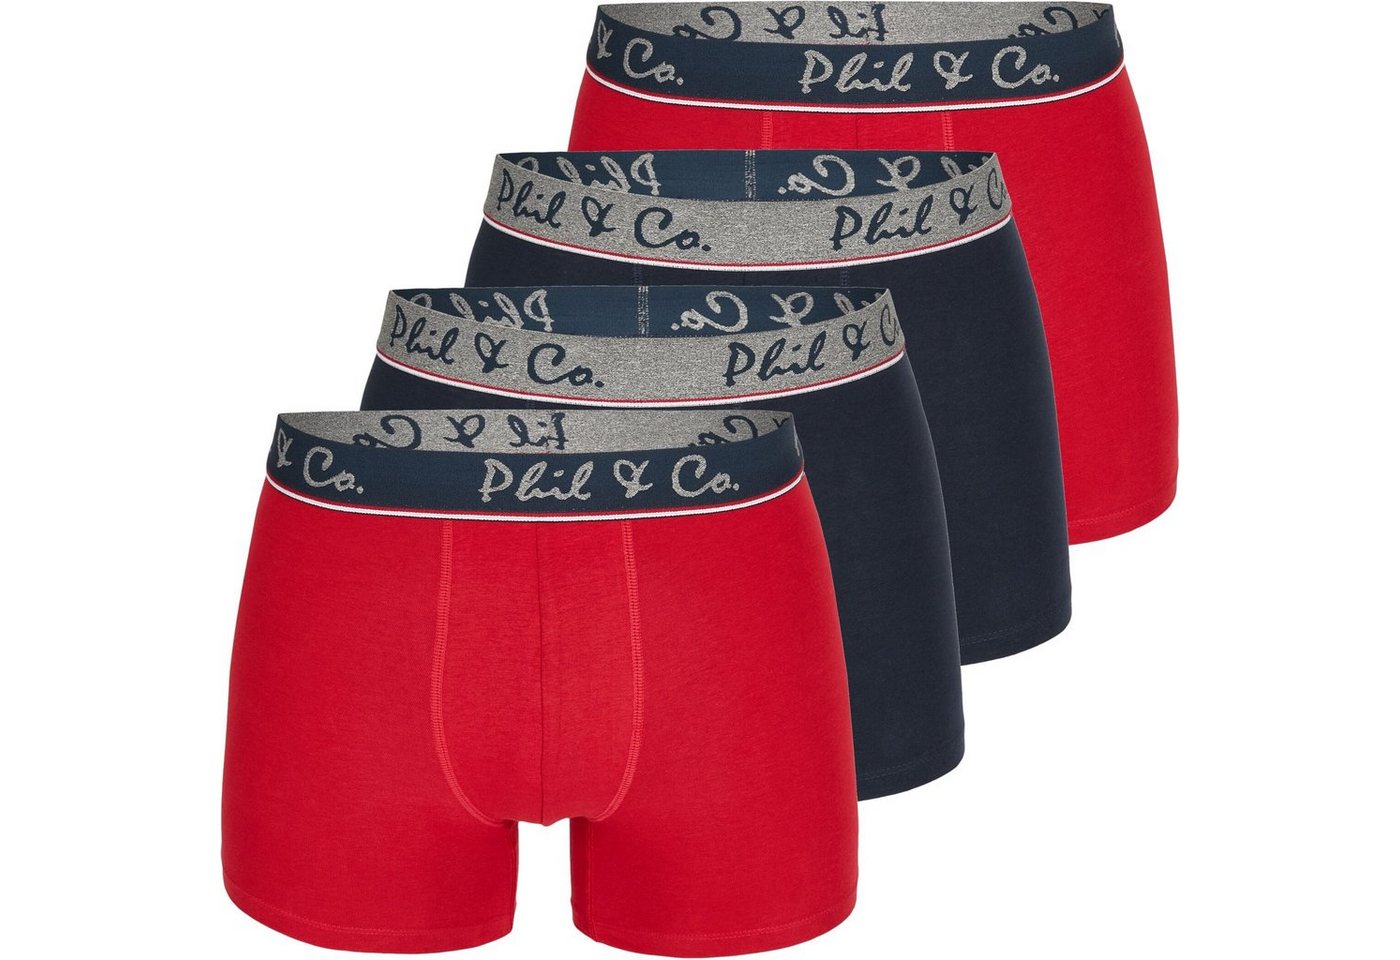 Phil & Co. Boxershorts 4er Pack Phil & Co Berlin Jersey Boxershorts Trunk Short Pant FARBWAHL (1-St) von Phil & Co.